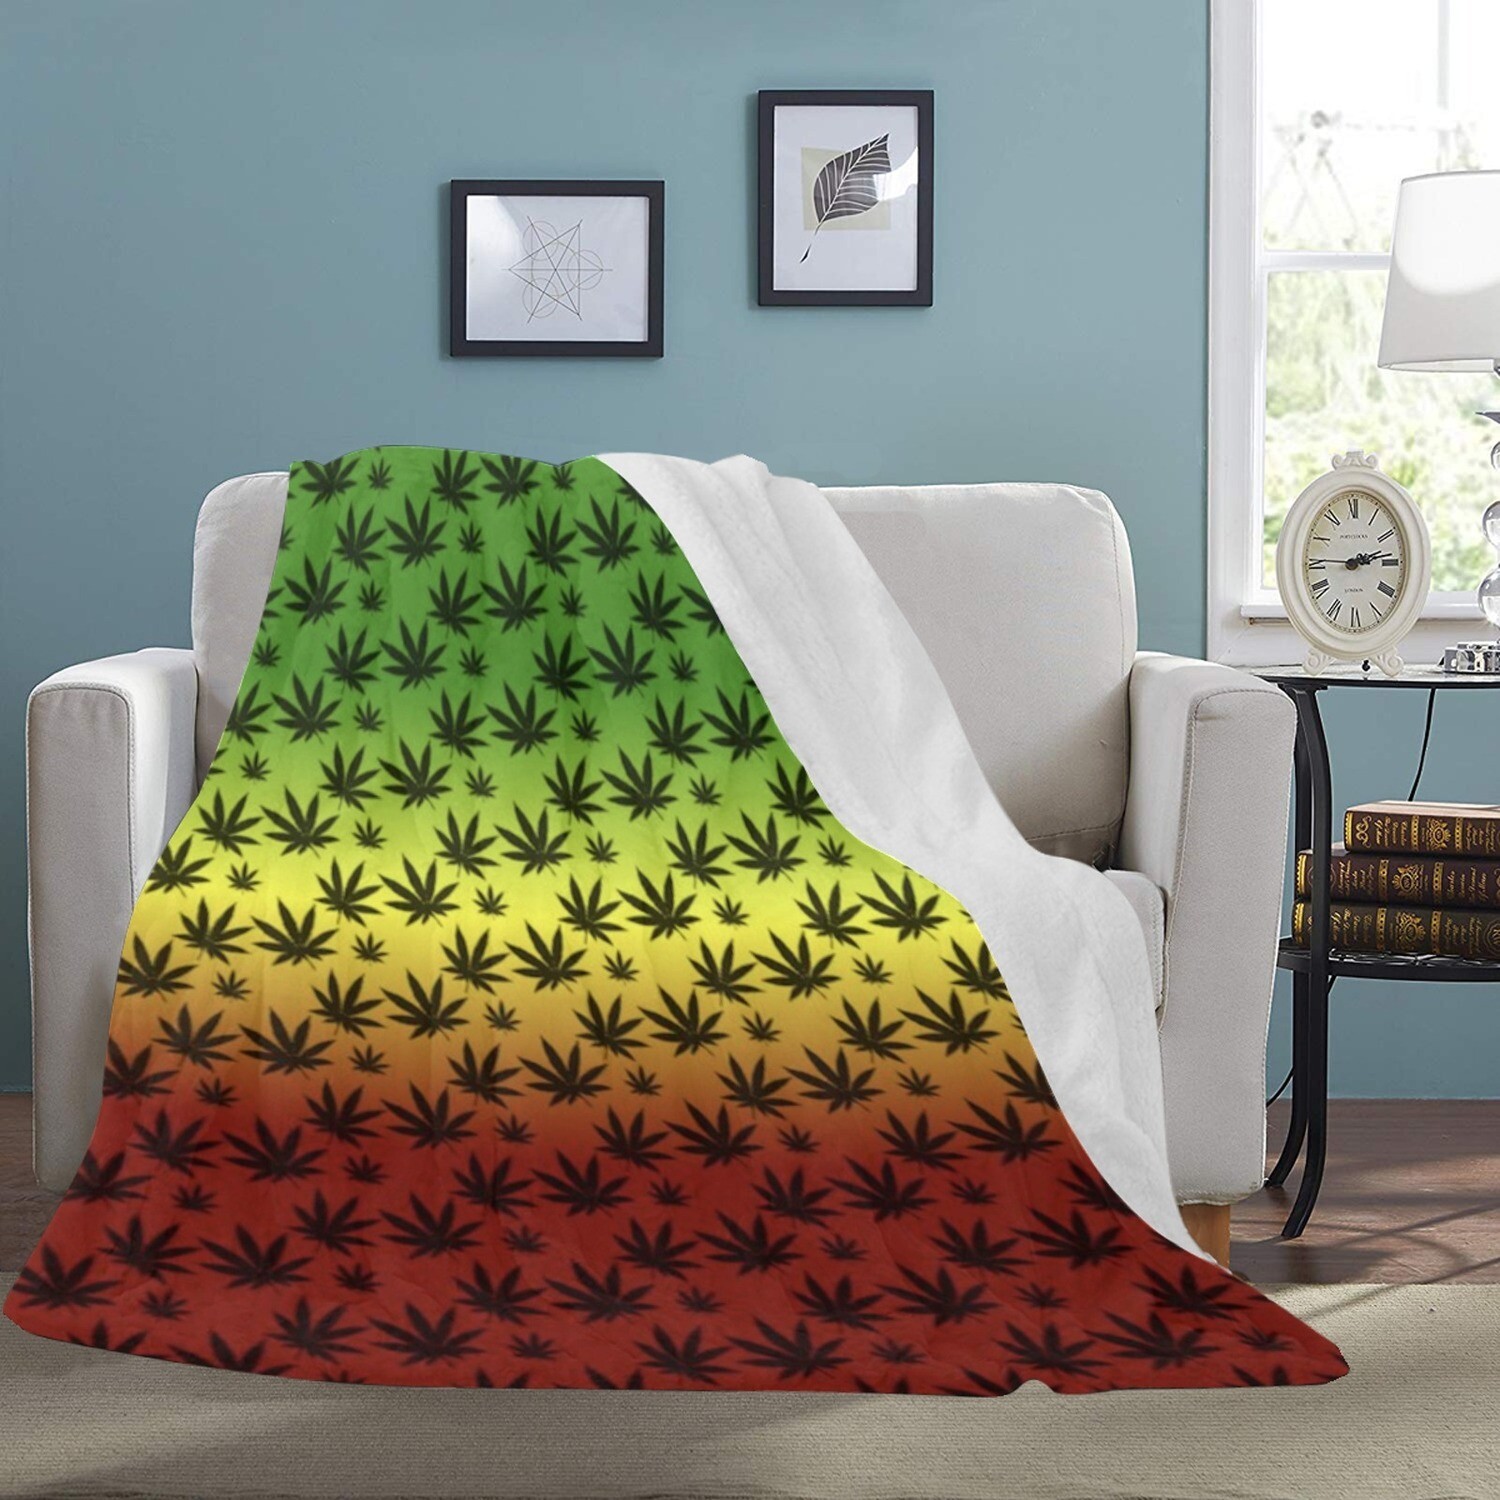 🤴🏽👸🏽Large Ultra-Soft Micro Fleece Blanket Cannabis Marijuana Weed Leaves gradient, cat, kitty, feline, gift, gift for her, gift for him, gift for them, 70"x80"